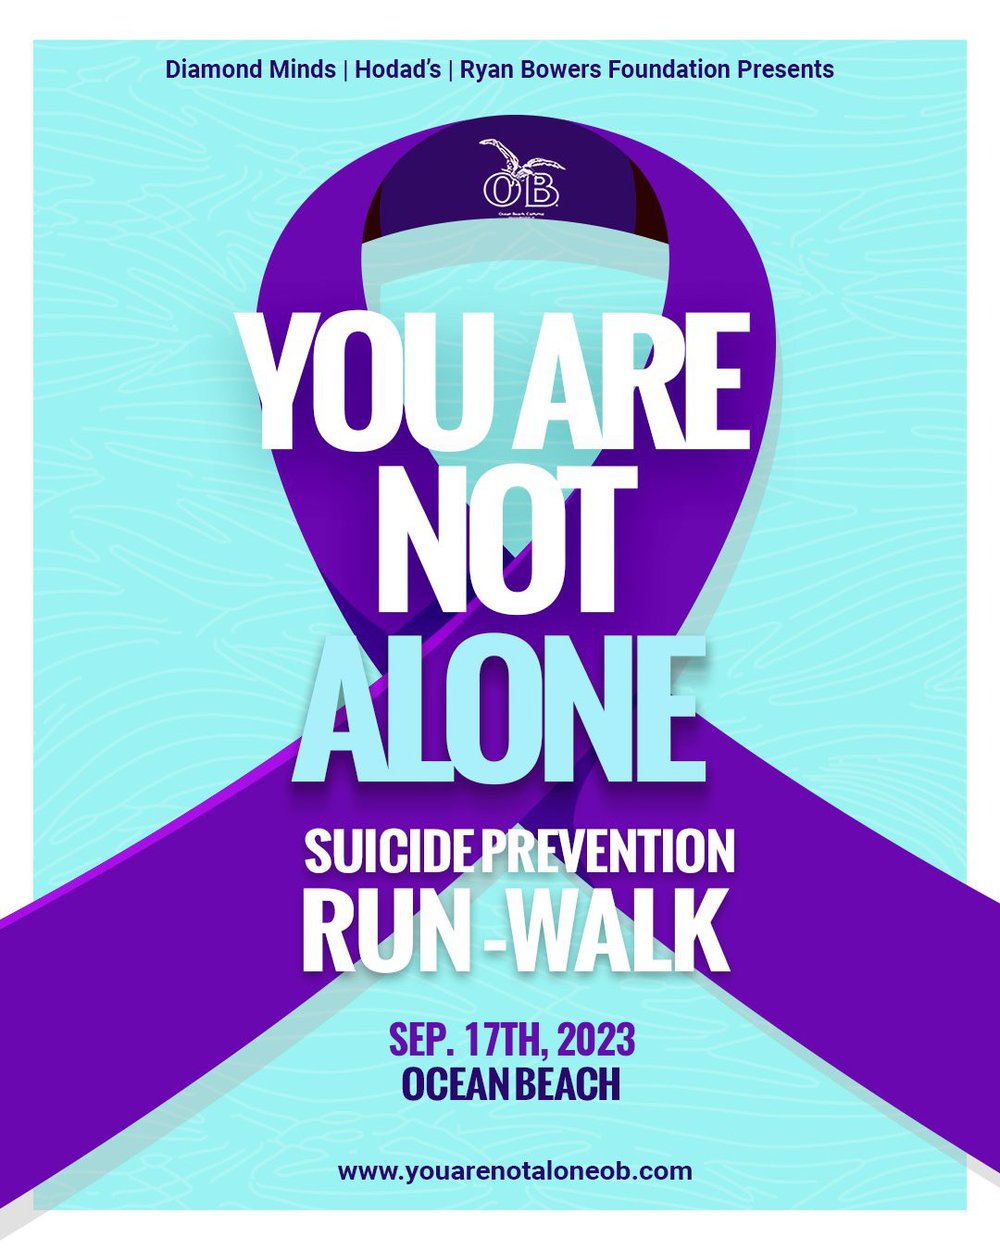 Ryan Bowers You Are Not Alone Suicide Prevention Run Walk